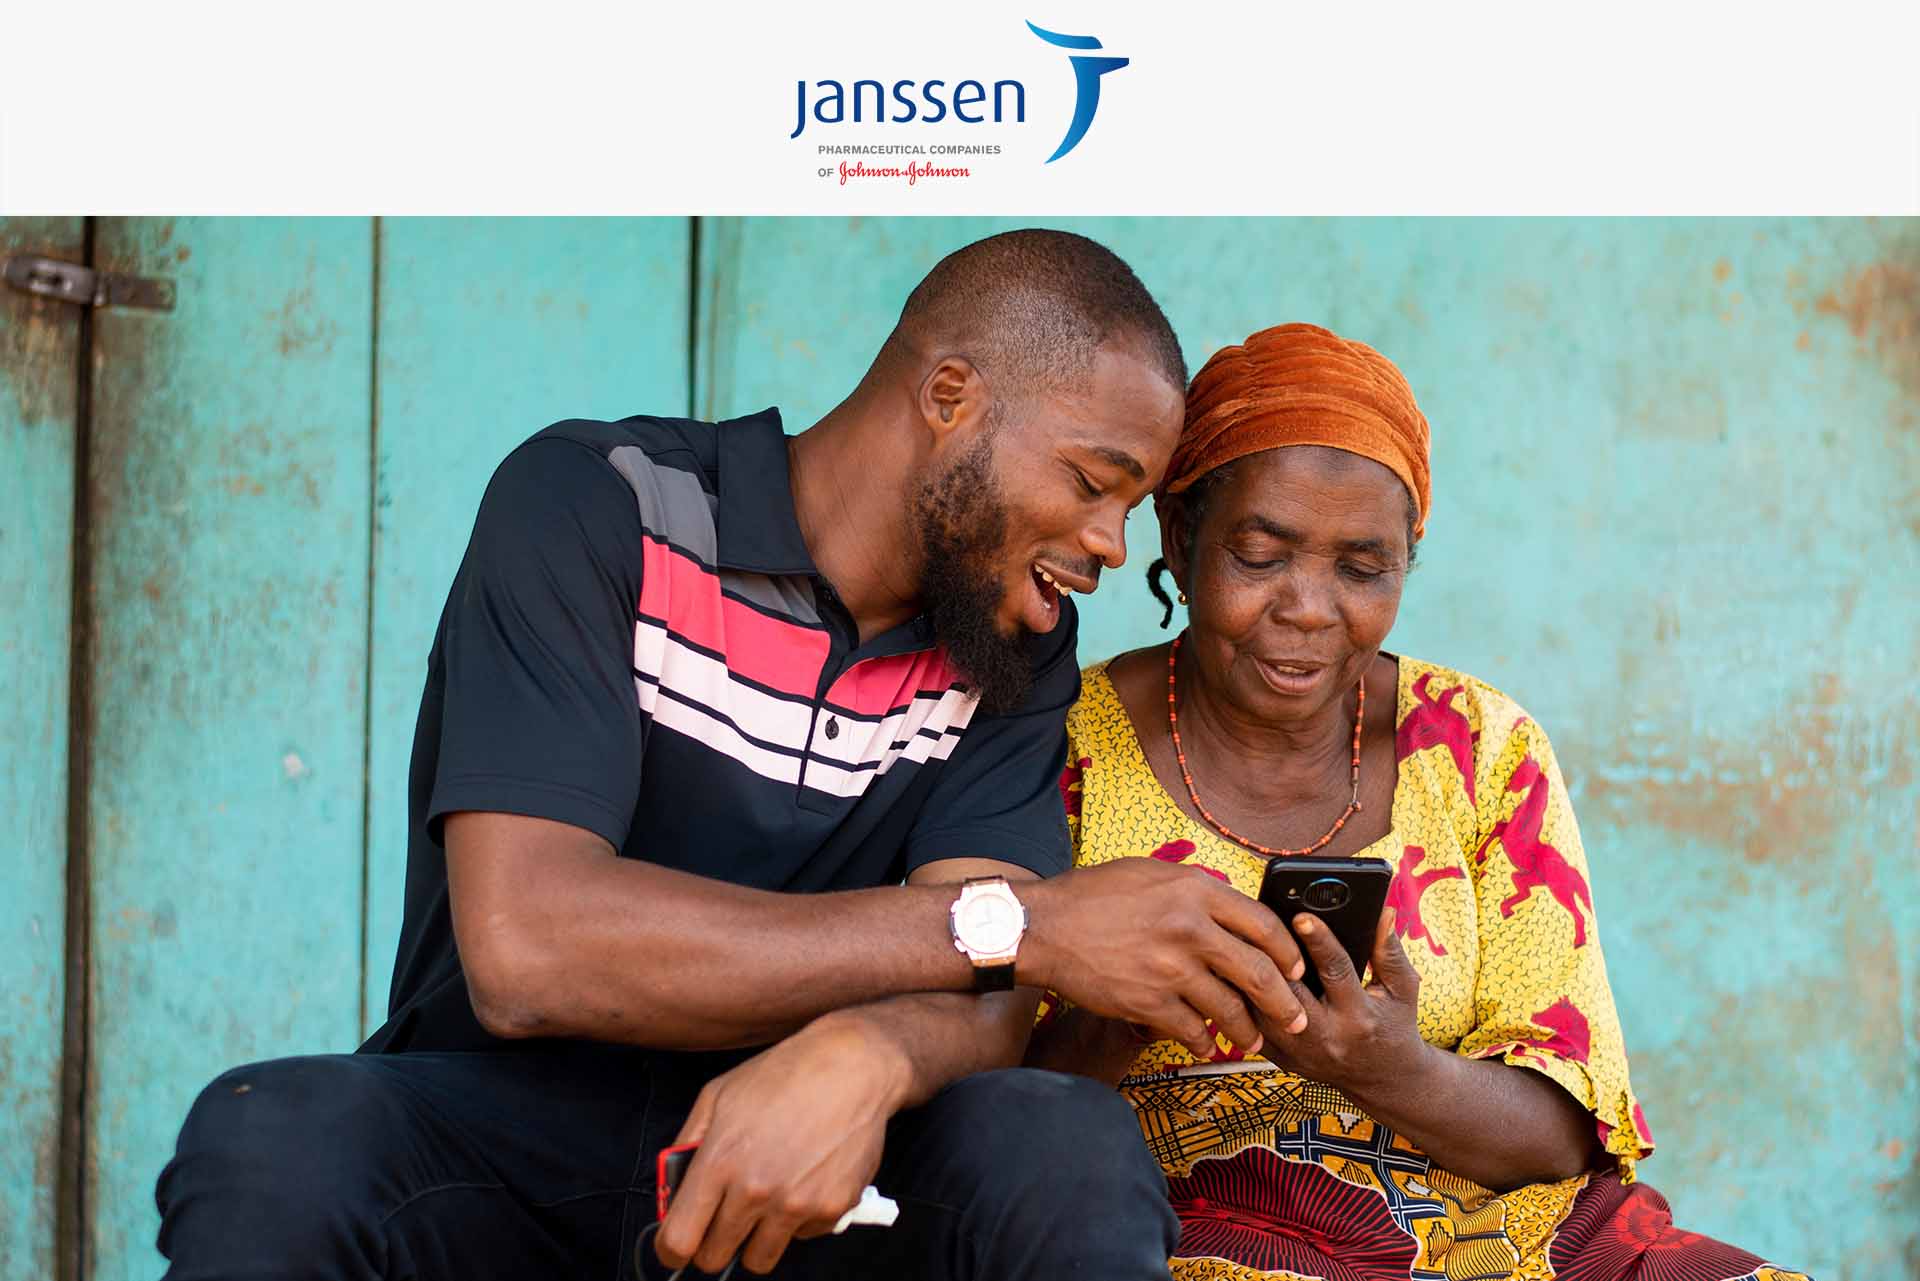 African man and woman looking at a phone